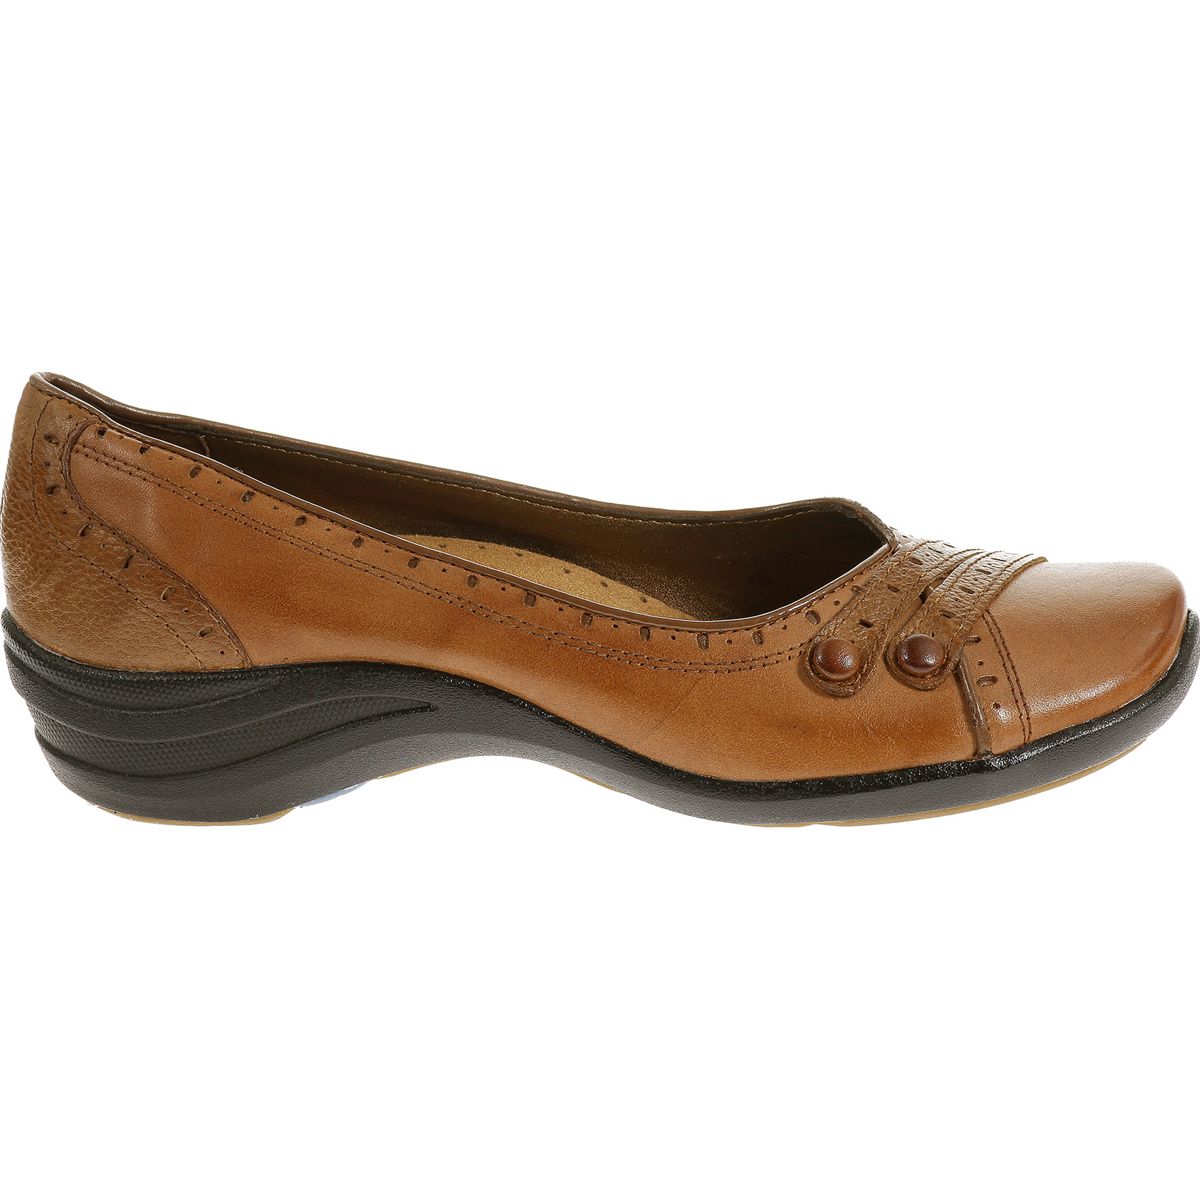 tan leather slip on shoes